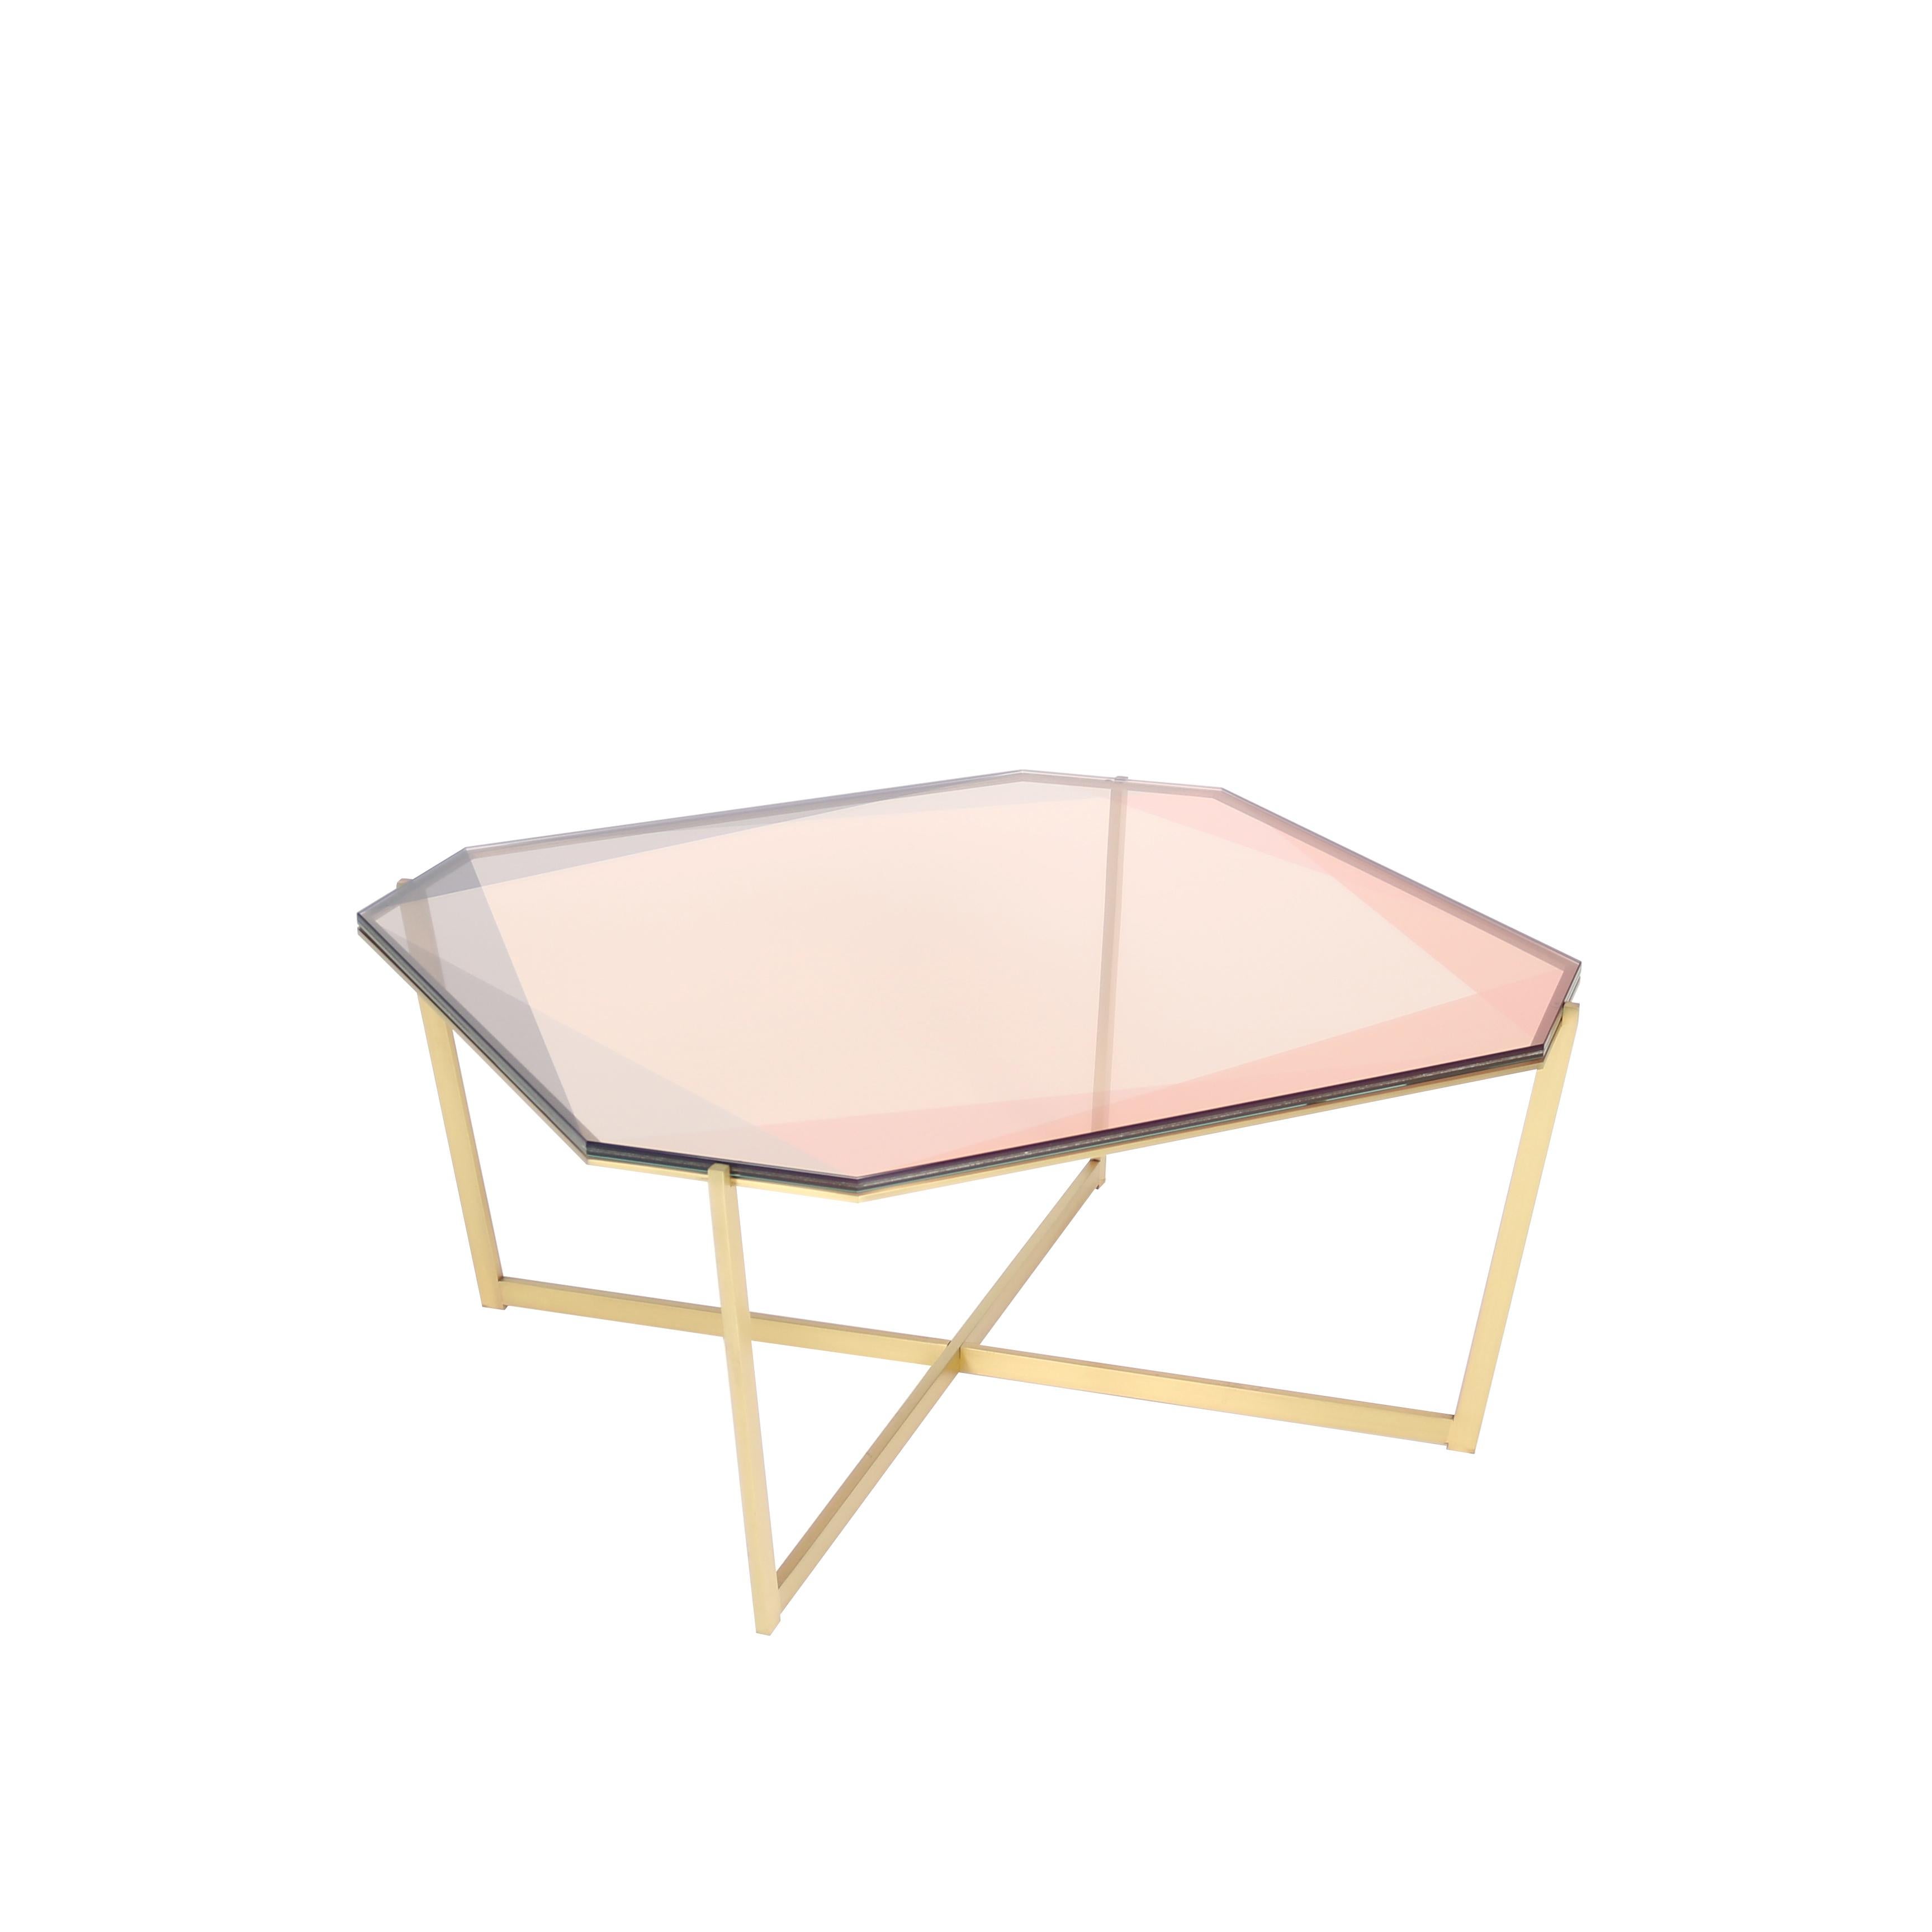 Our Gem collection of tables are inspired by the reflections of light and transparencies found in gemstones. These metal and glass tables translate facets through layers of color and varying opacity. Each table base is designed as a setting with